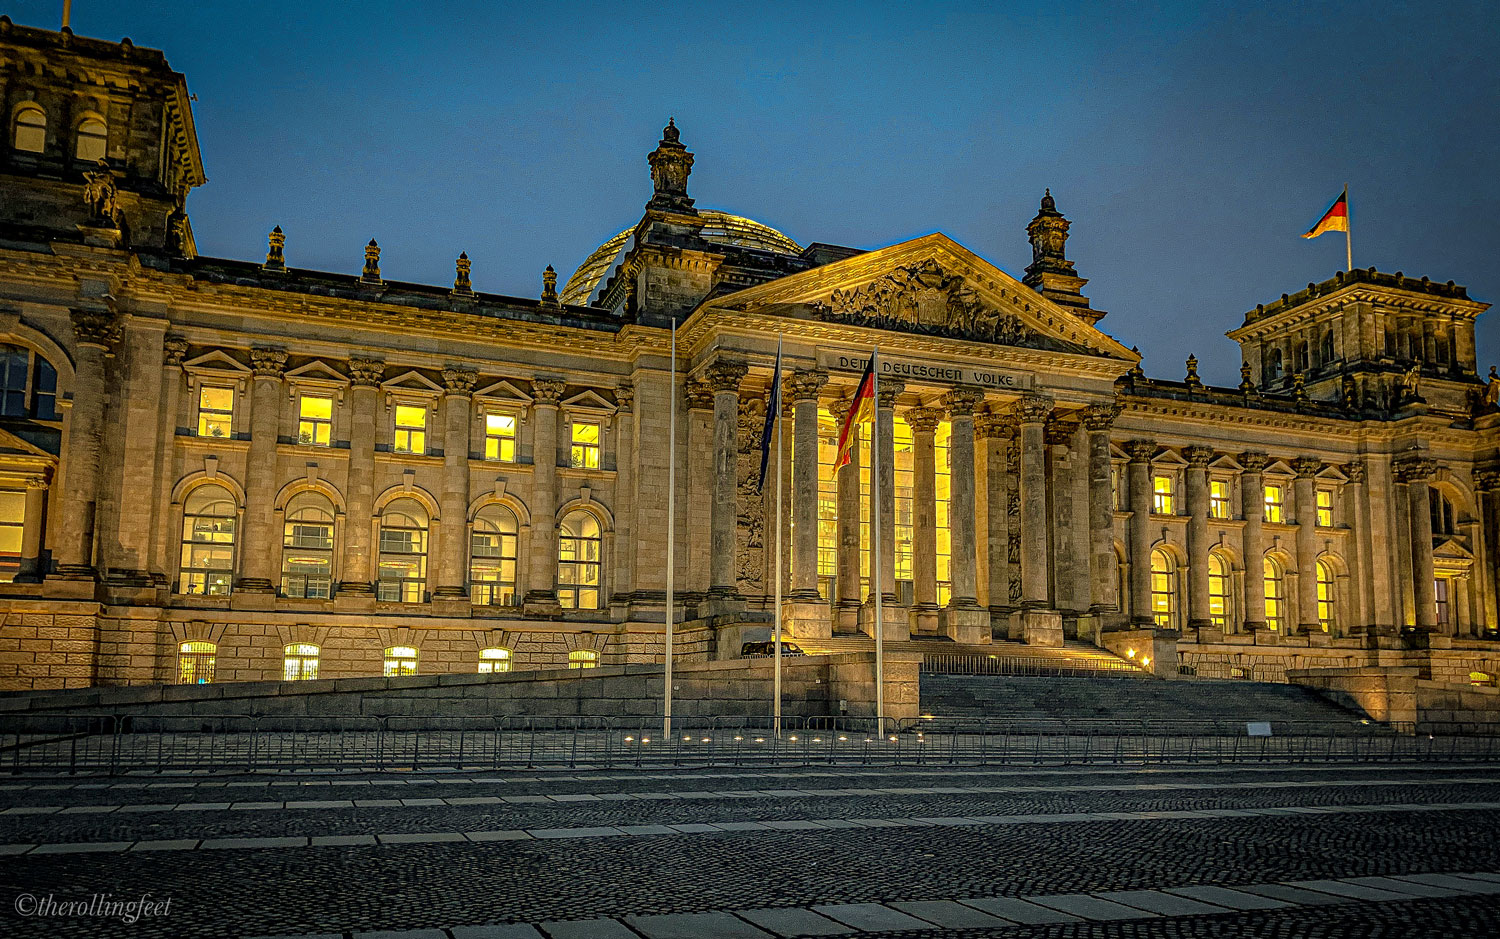 Front of the Reichstag building